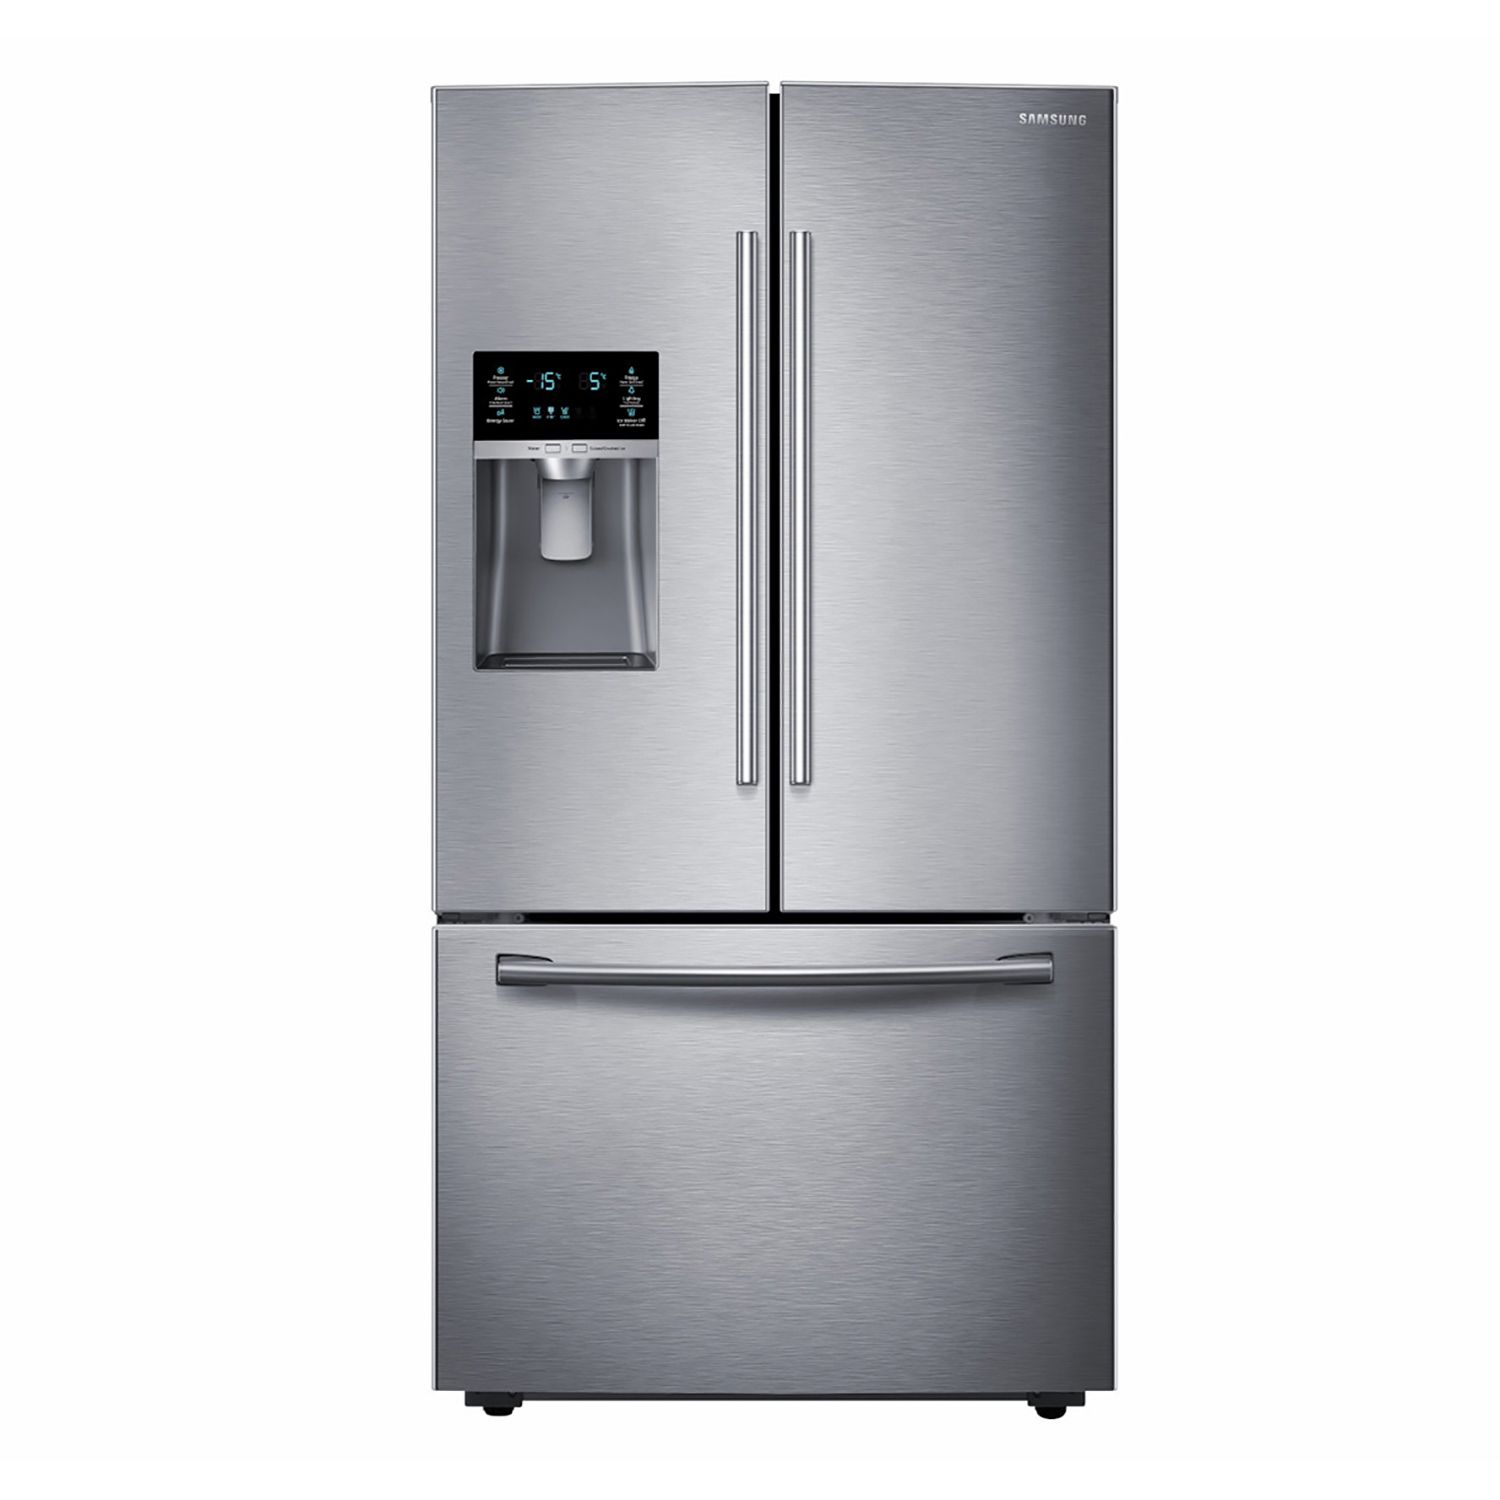 Samsung RF28HFEDBSR 28.1 Cu. Ft. French Door Refrigerator with Thru-the-Door Ice and Water – Stainless-Steel